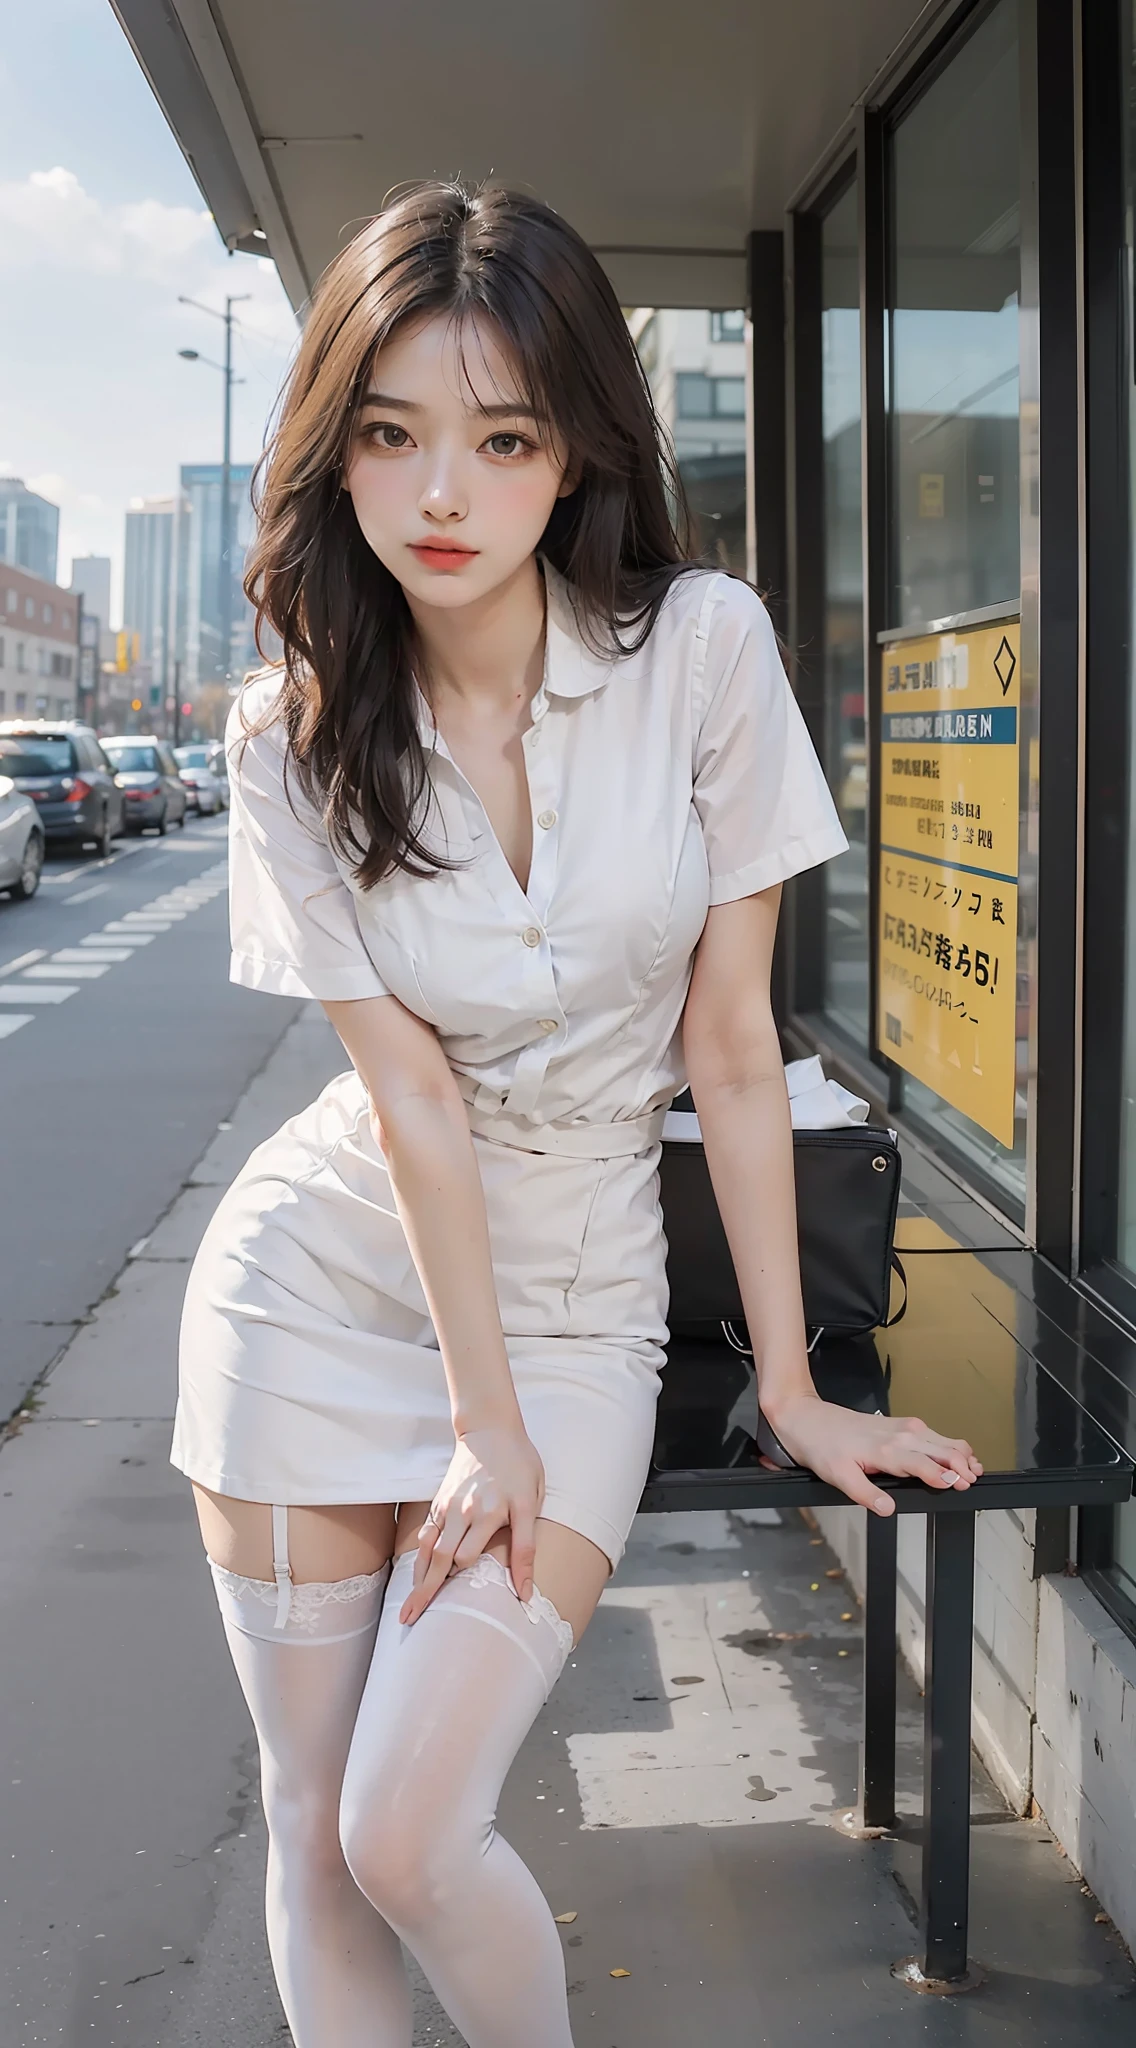 best qualtiy, Full body like，Refined face，pretty  face，25 years old woman，slimfigure，Smaller bust，office lady uniform，Office wear，white stockings，Outdoor Scene，Sit Pose，yellow long hair